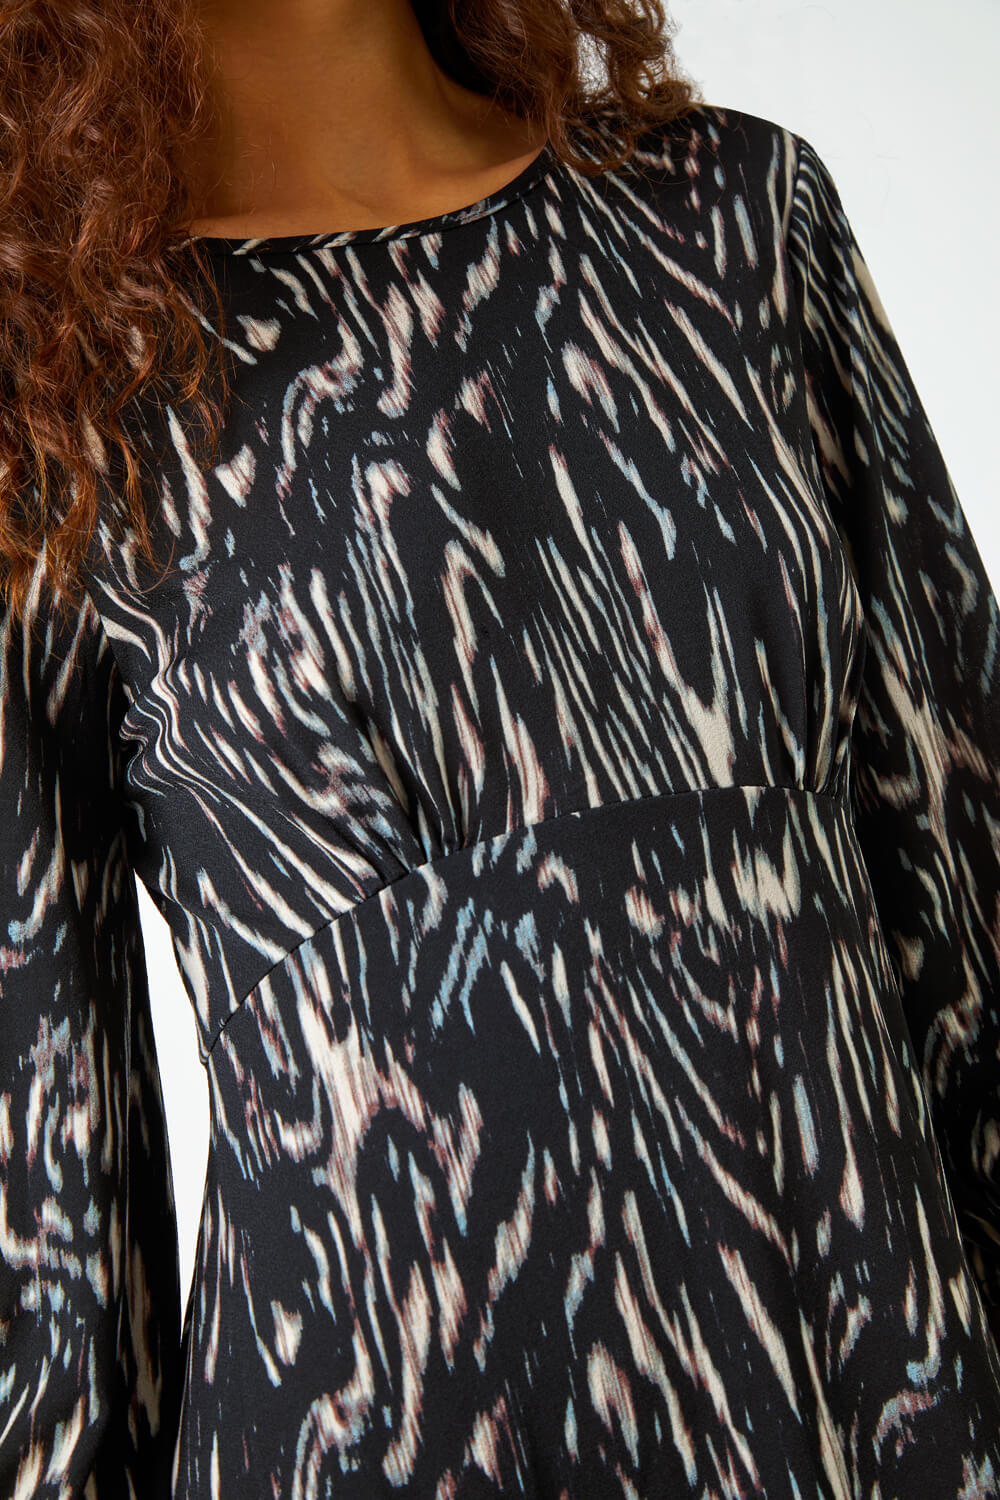 Black Abstract Print Stretch Swing Dress, Image 5 of 5